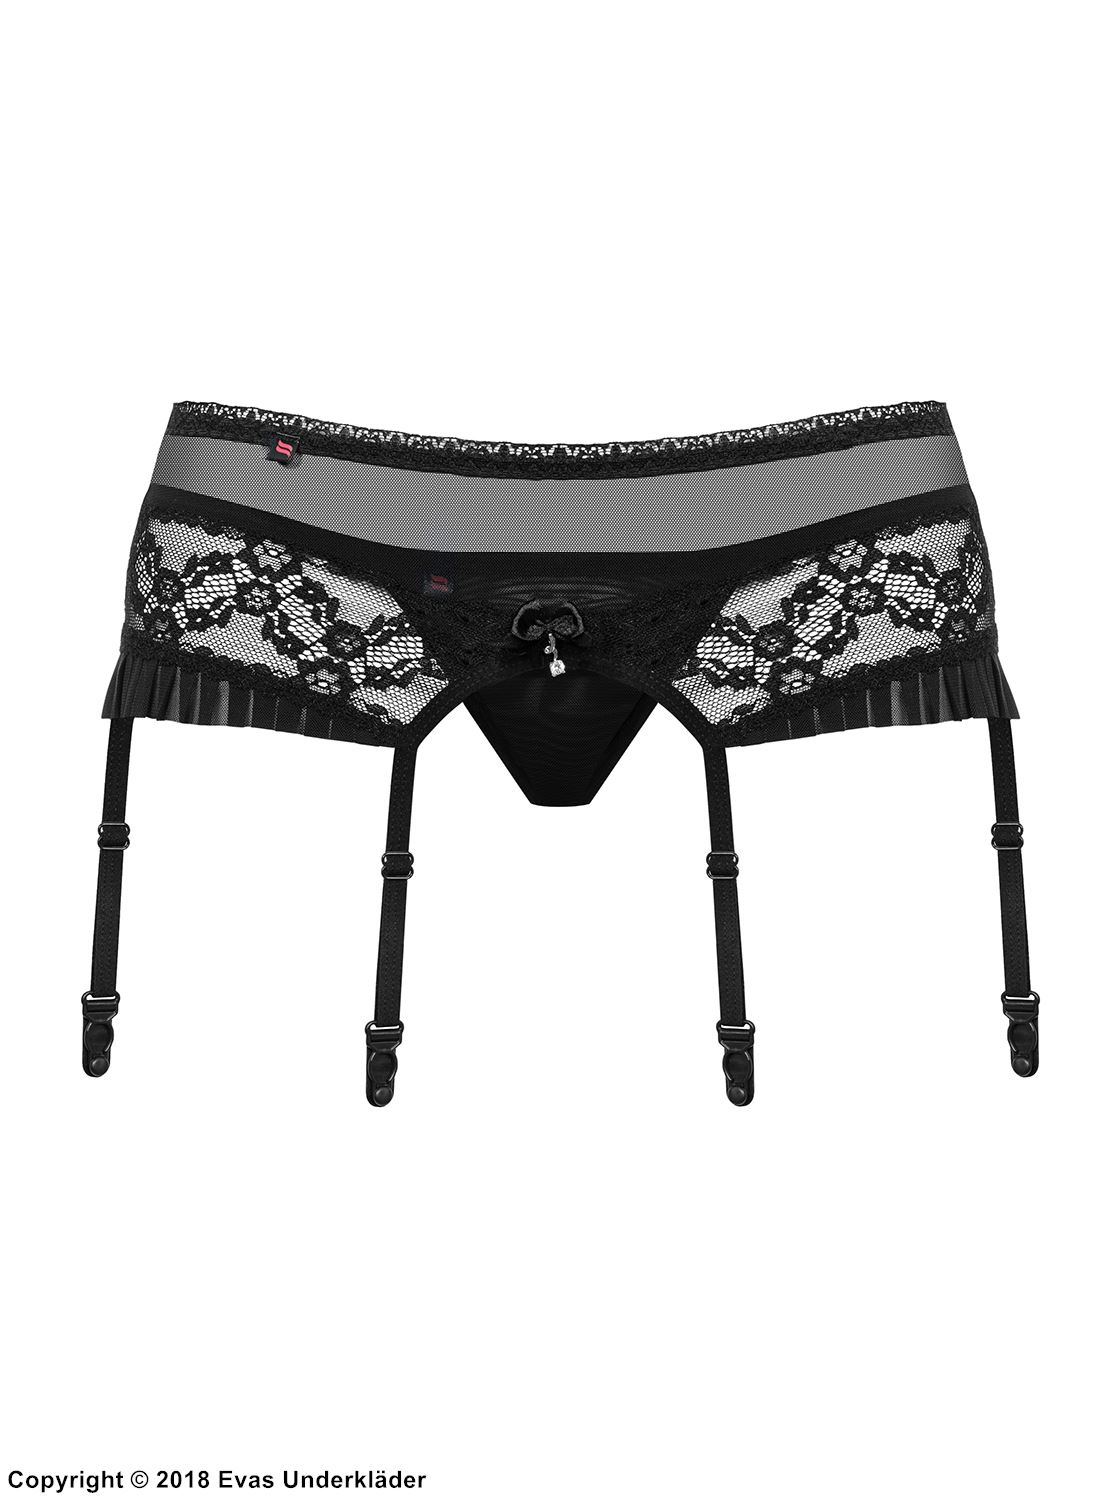 Garter belt and panty, floral lace, mesh inlay, pleated trim